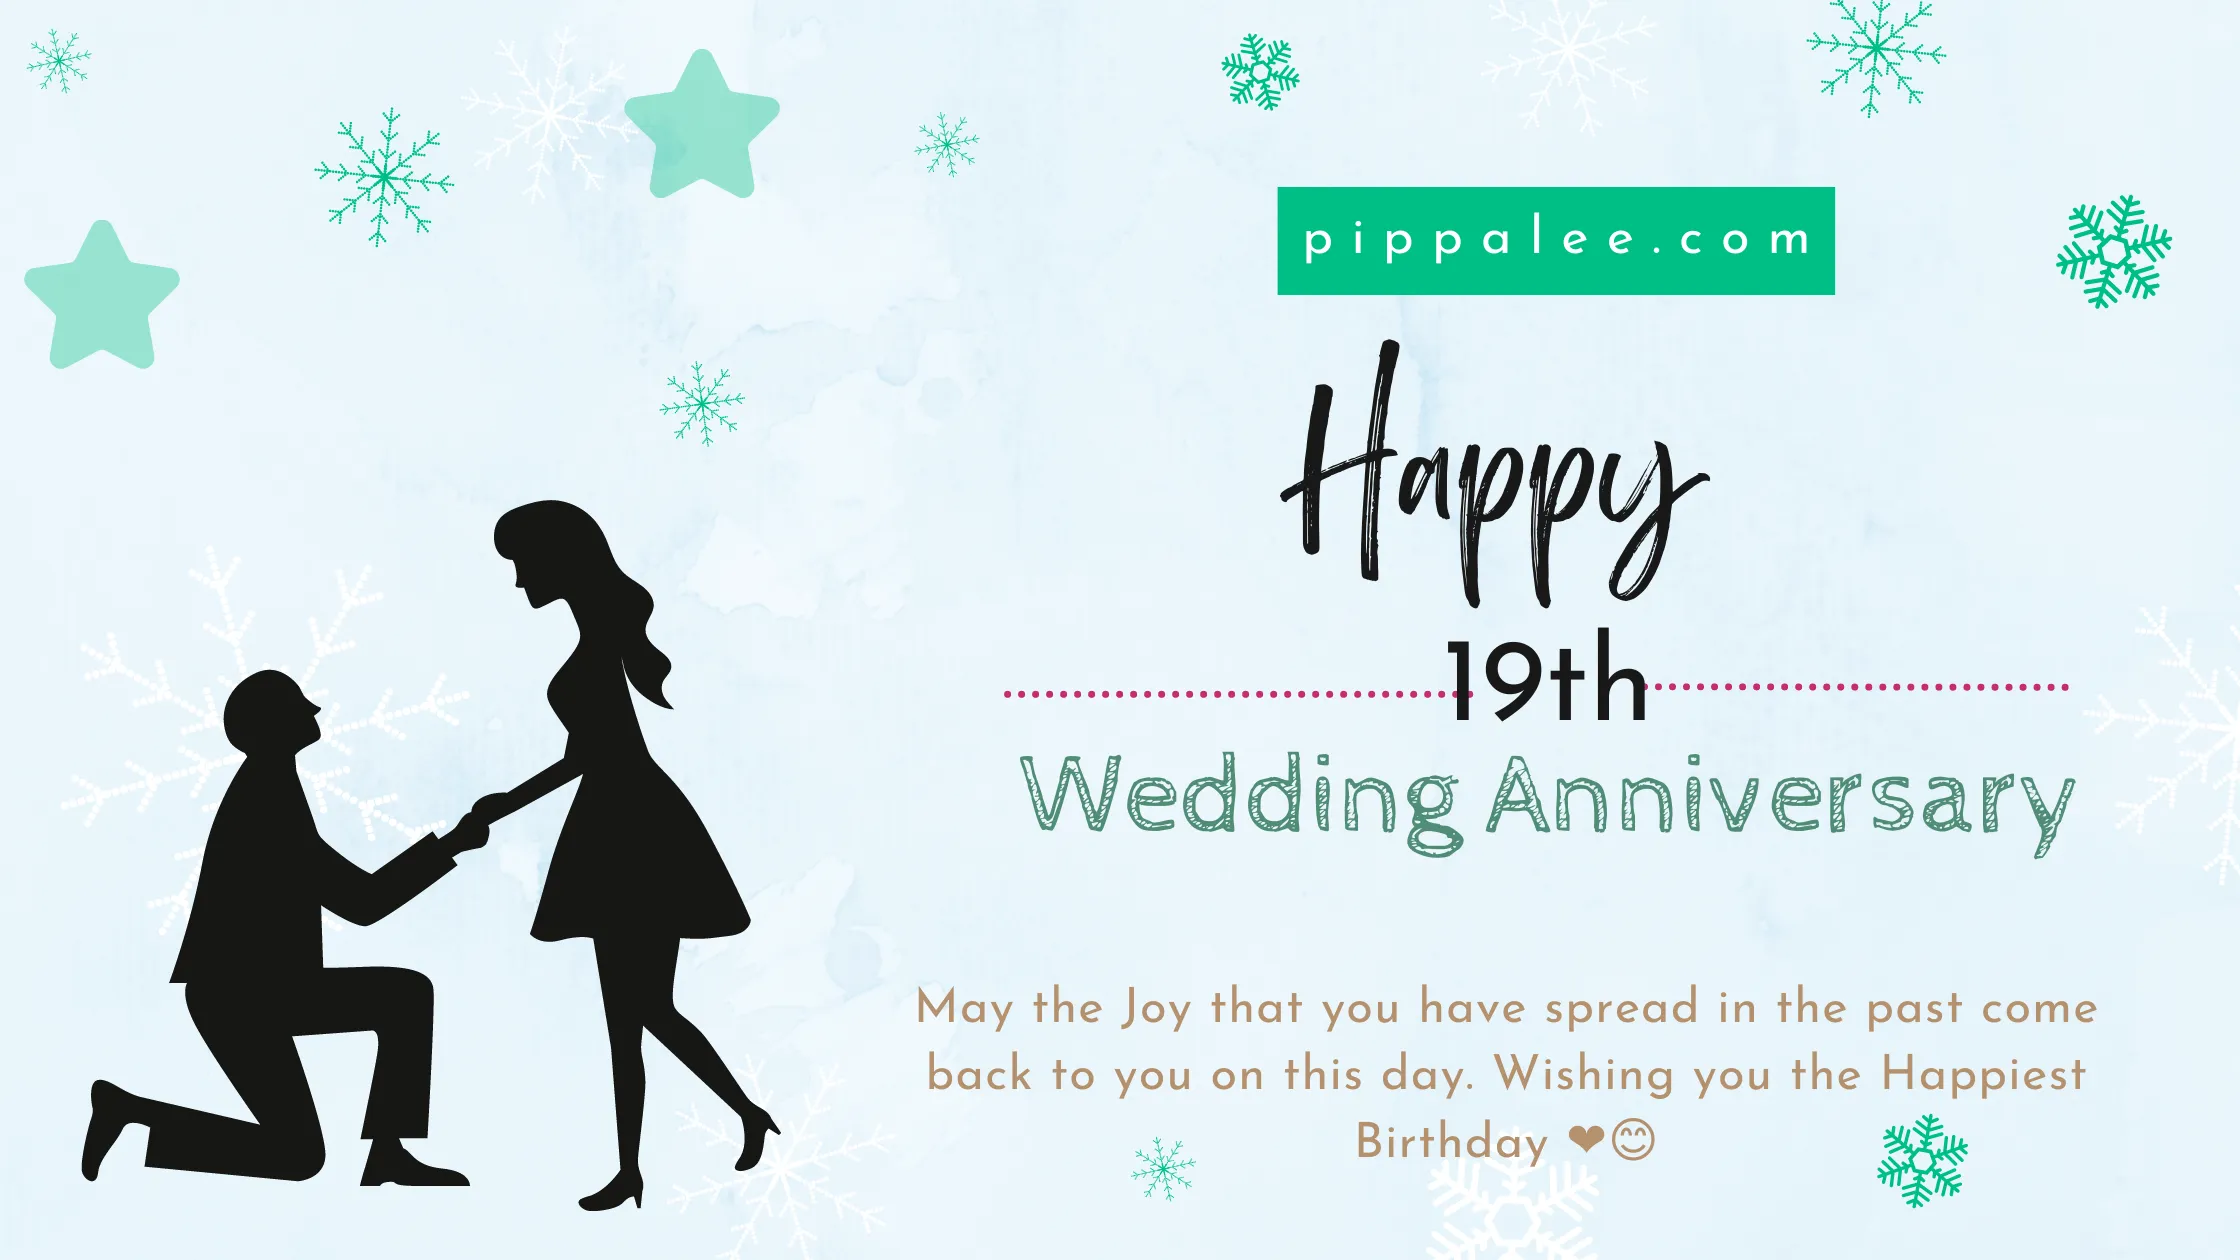 19th Wedding Anniversary - Wishes & Messages